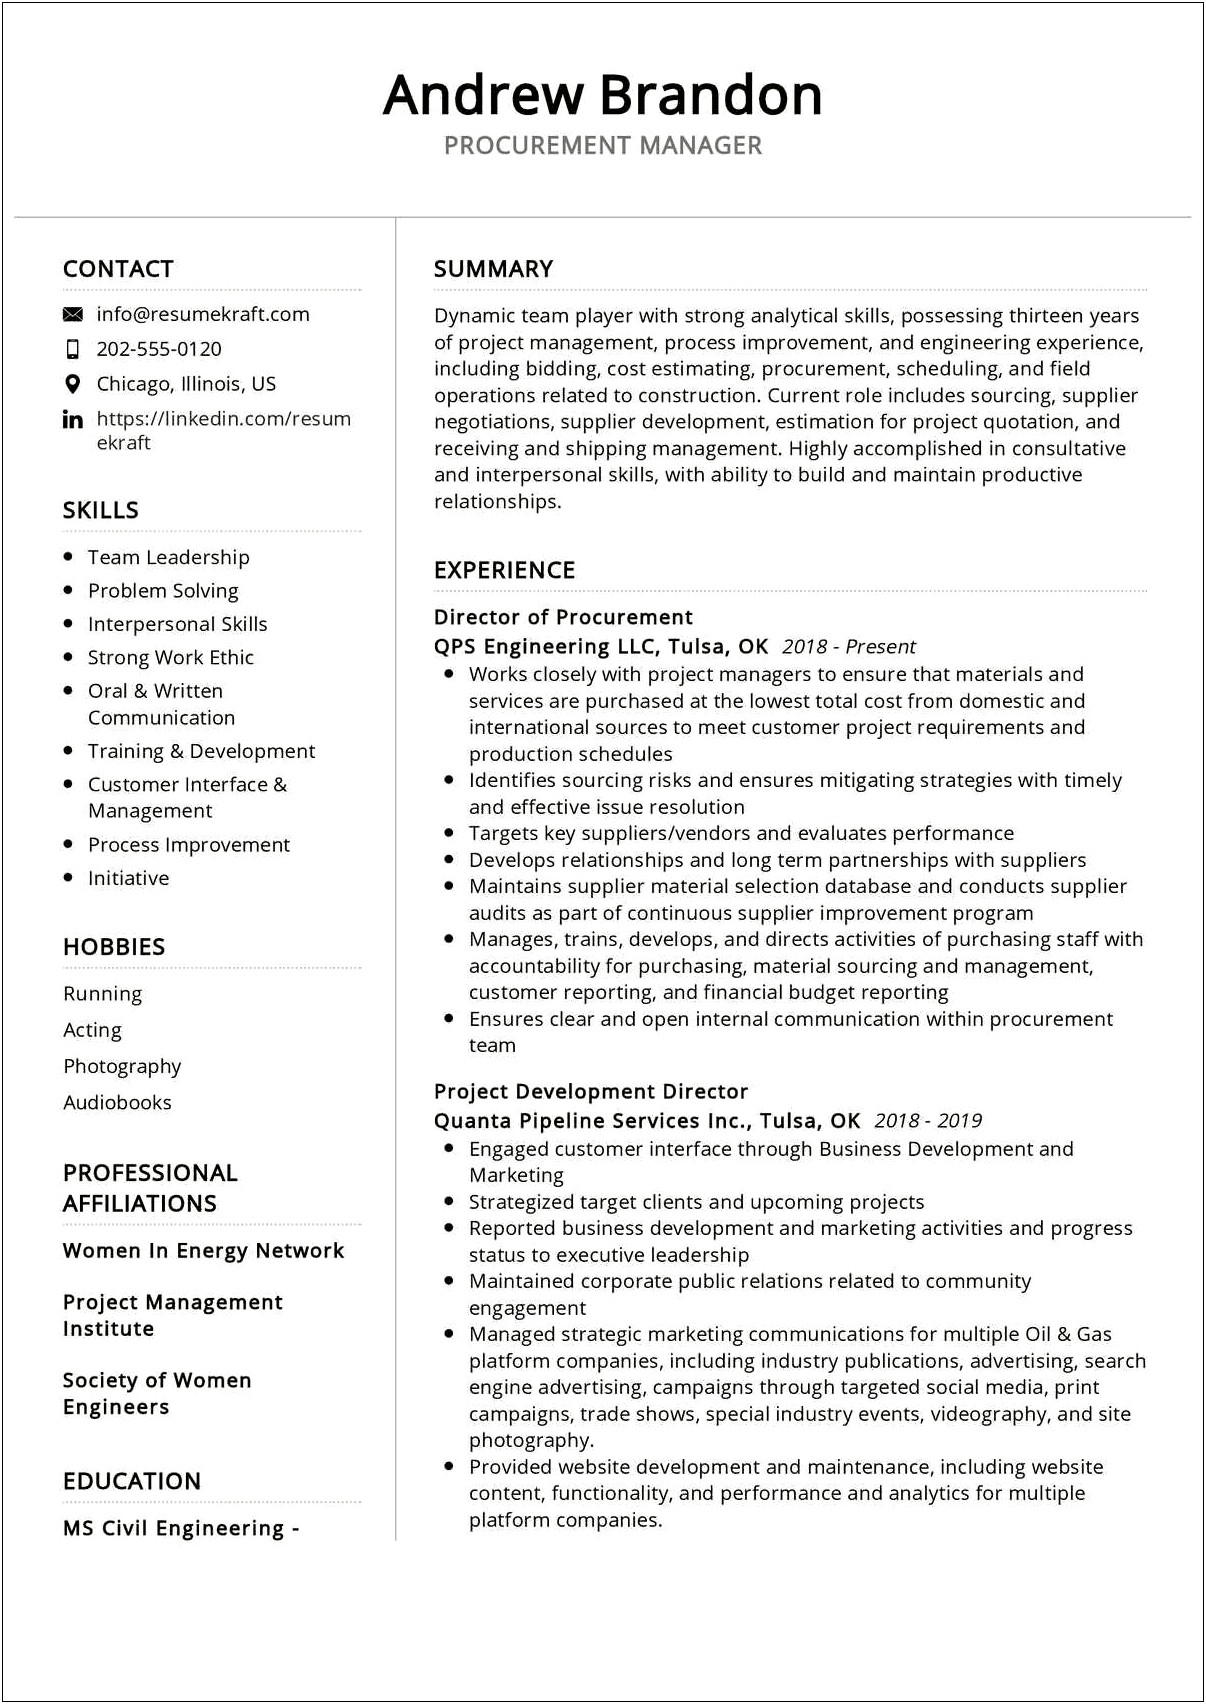 Contract Manufacturing Program Manager Resume